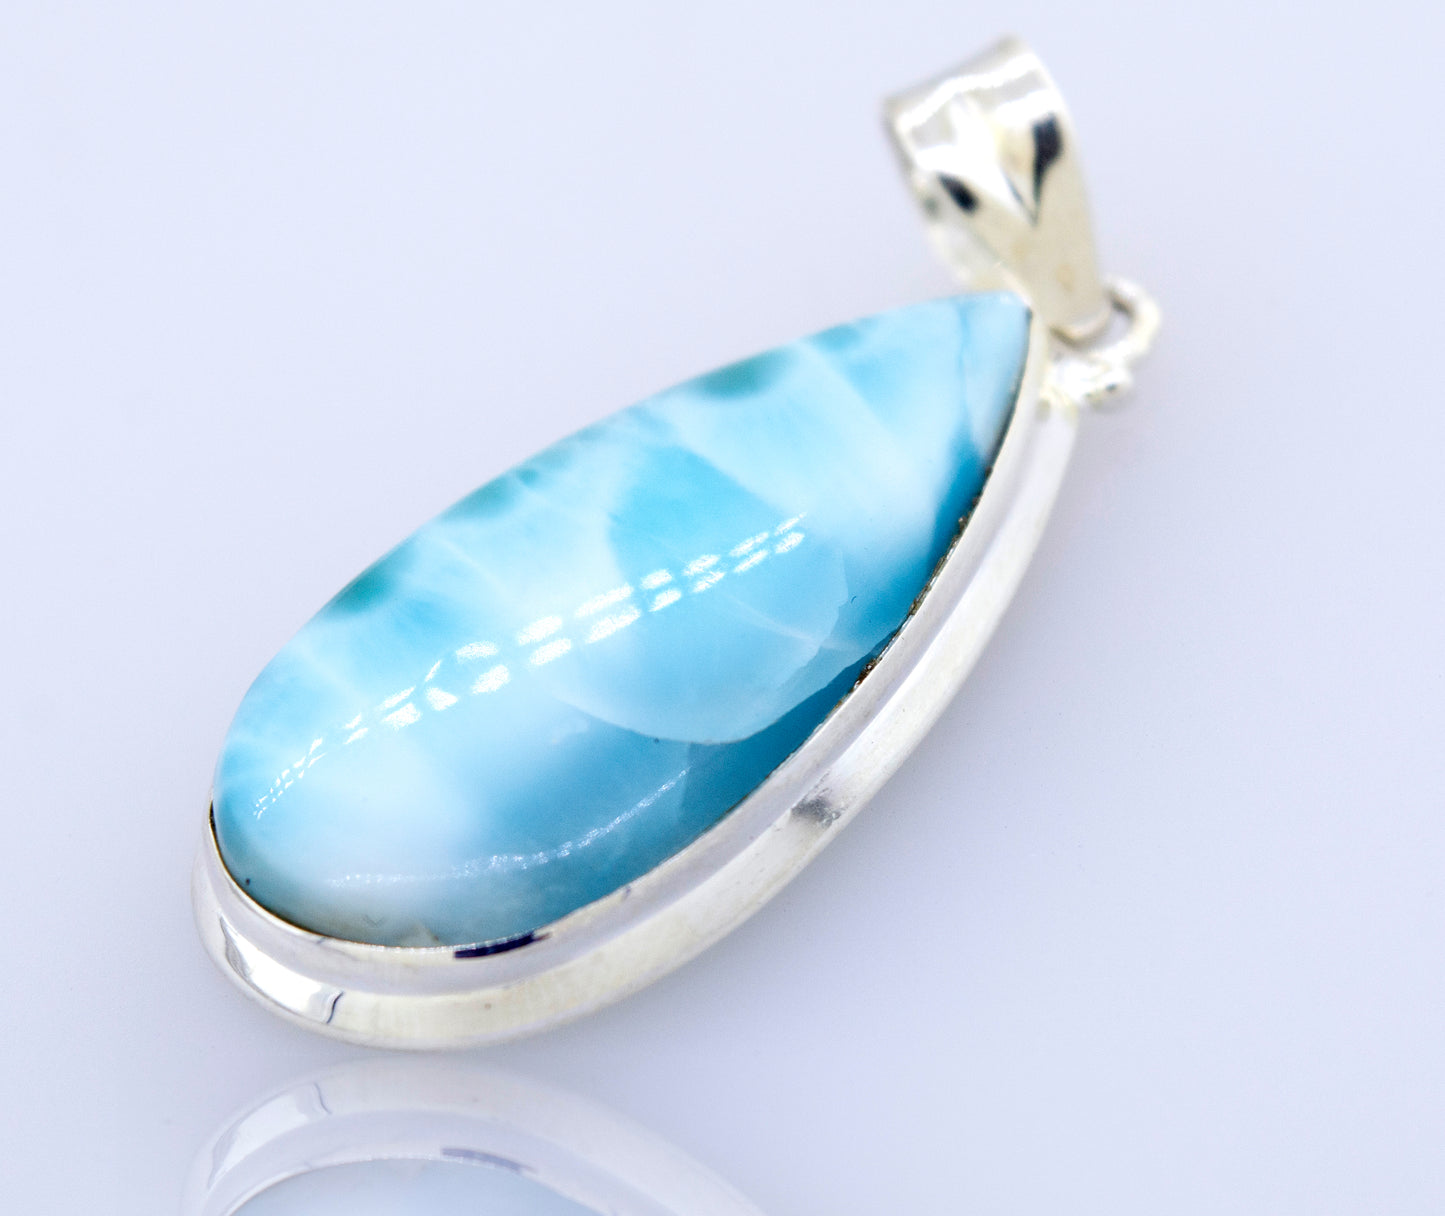 This Medium Teardrop Larimar pendant from Super Silver with a blue lazuli stone is perfect for any occasion and is sure to make you stand out.